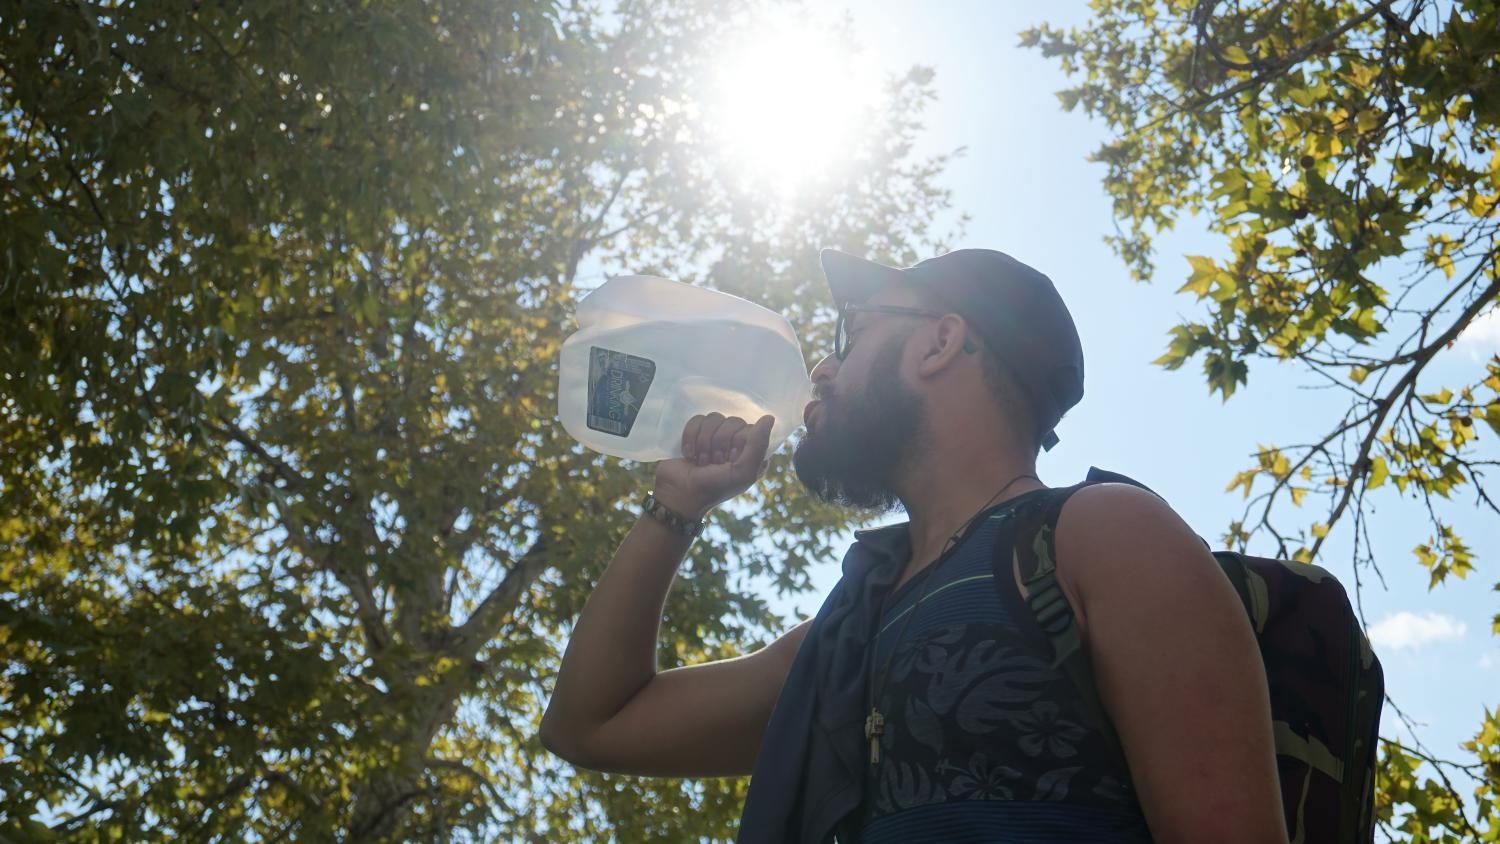 NMSU student trying to stay hydrated in these high tempuratures while walking to class.